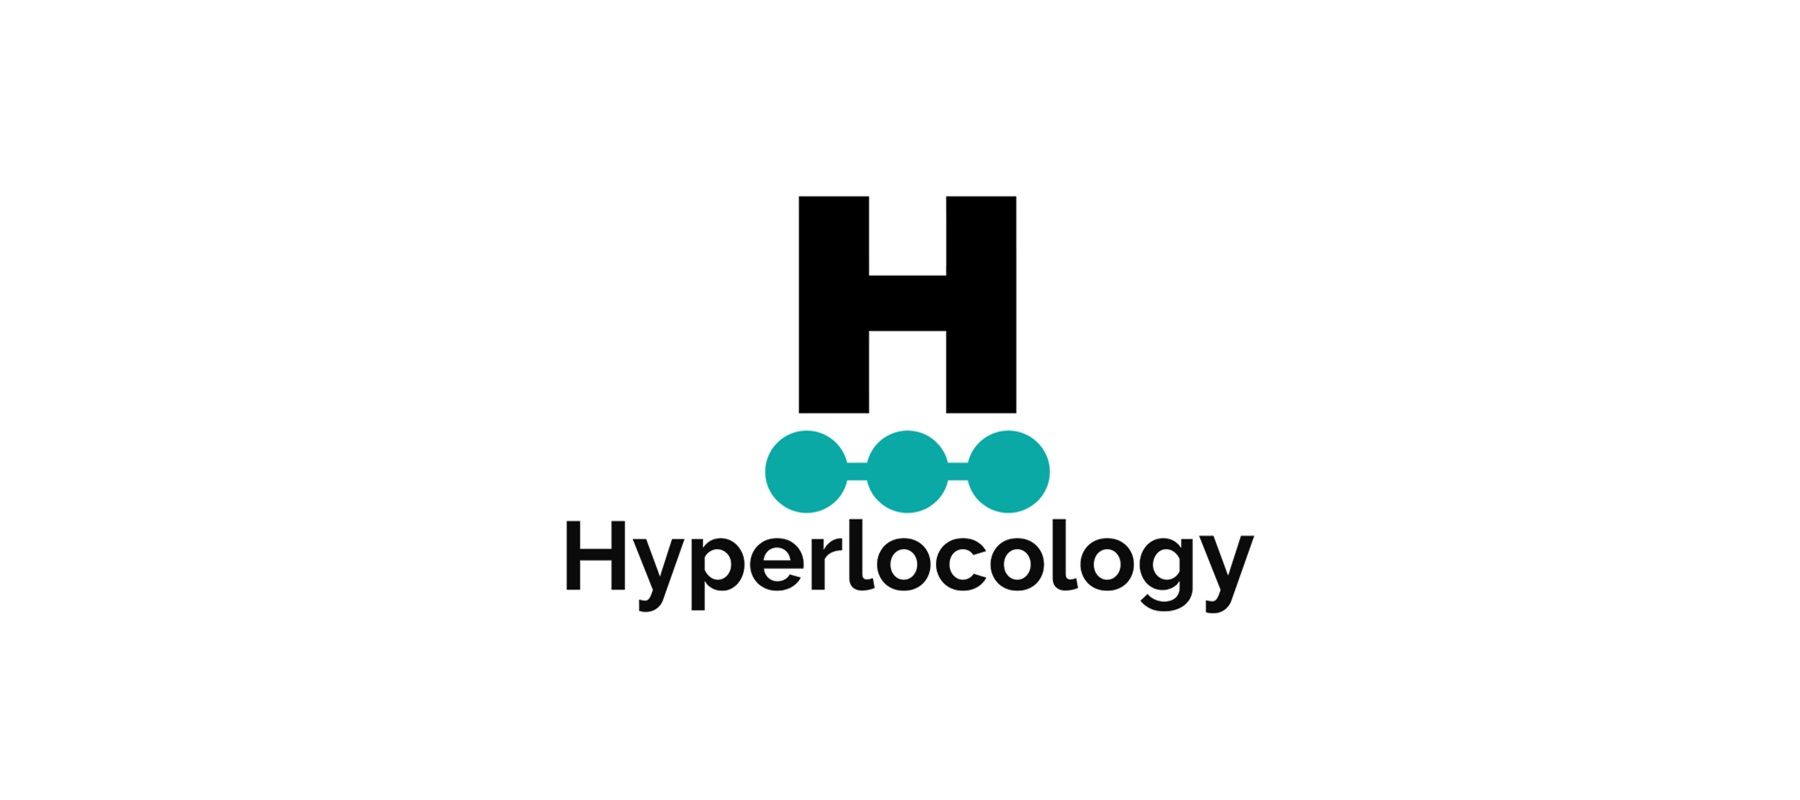 Hyperlocology and Do it Best partner to transform local advertising and co-op marketing